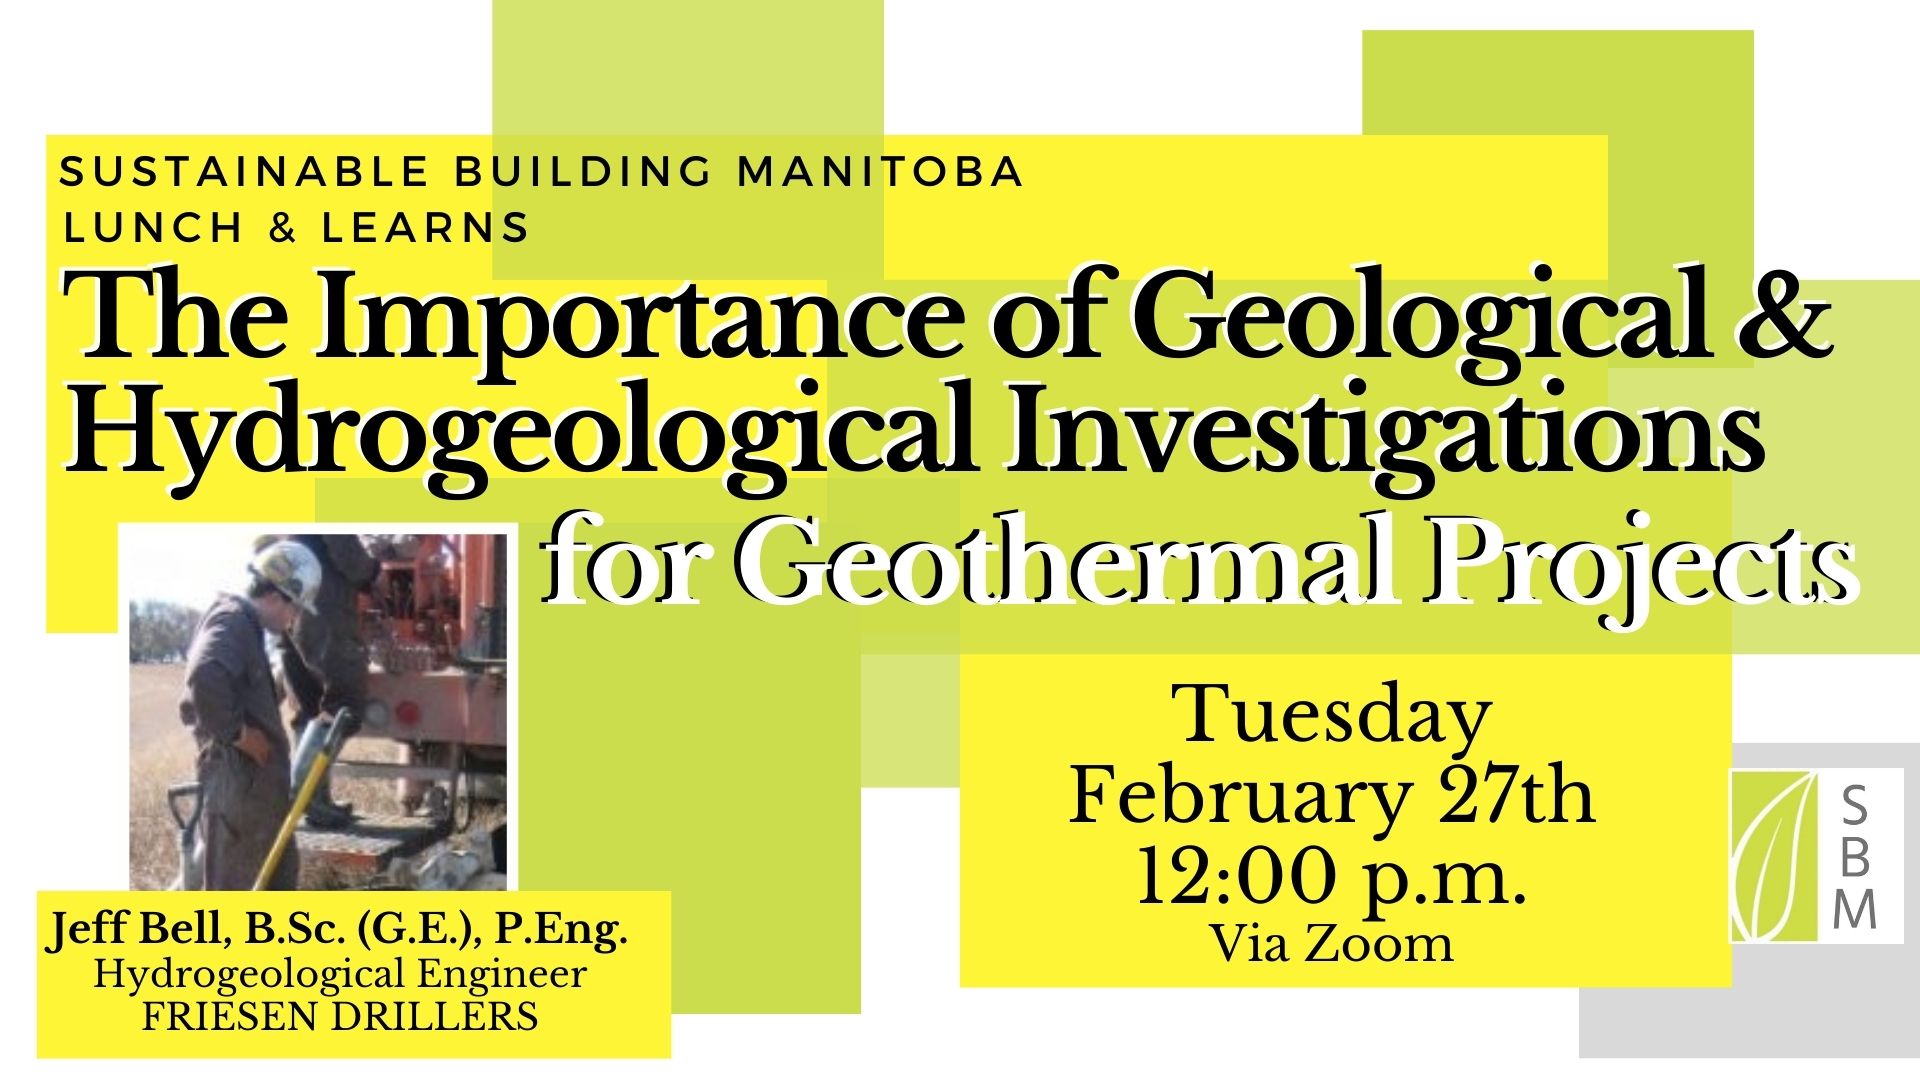 Sustainable Building Manitoba Lunch & Learns The Importance of Geological and Hydrogeological Investigations for Geothermal Projects Tuesday February 27th 12:00PM via Zoom Jeff Bell Hydrogeological Engineer Friesen Drillers